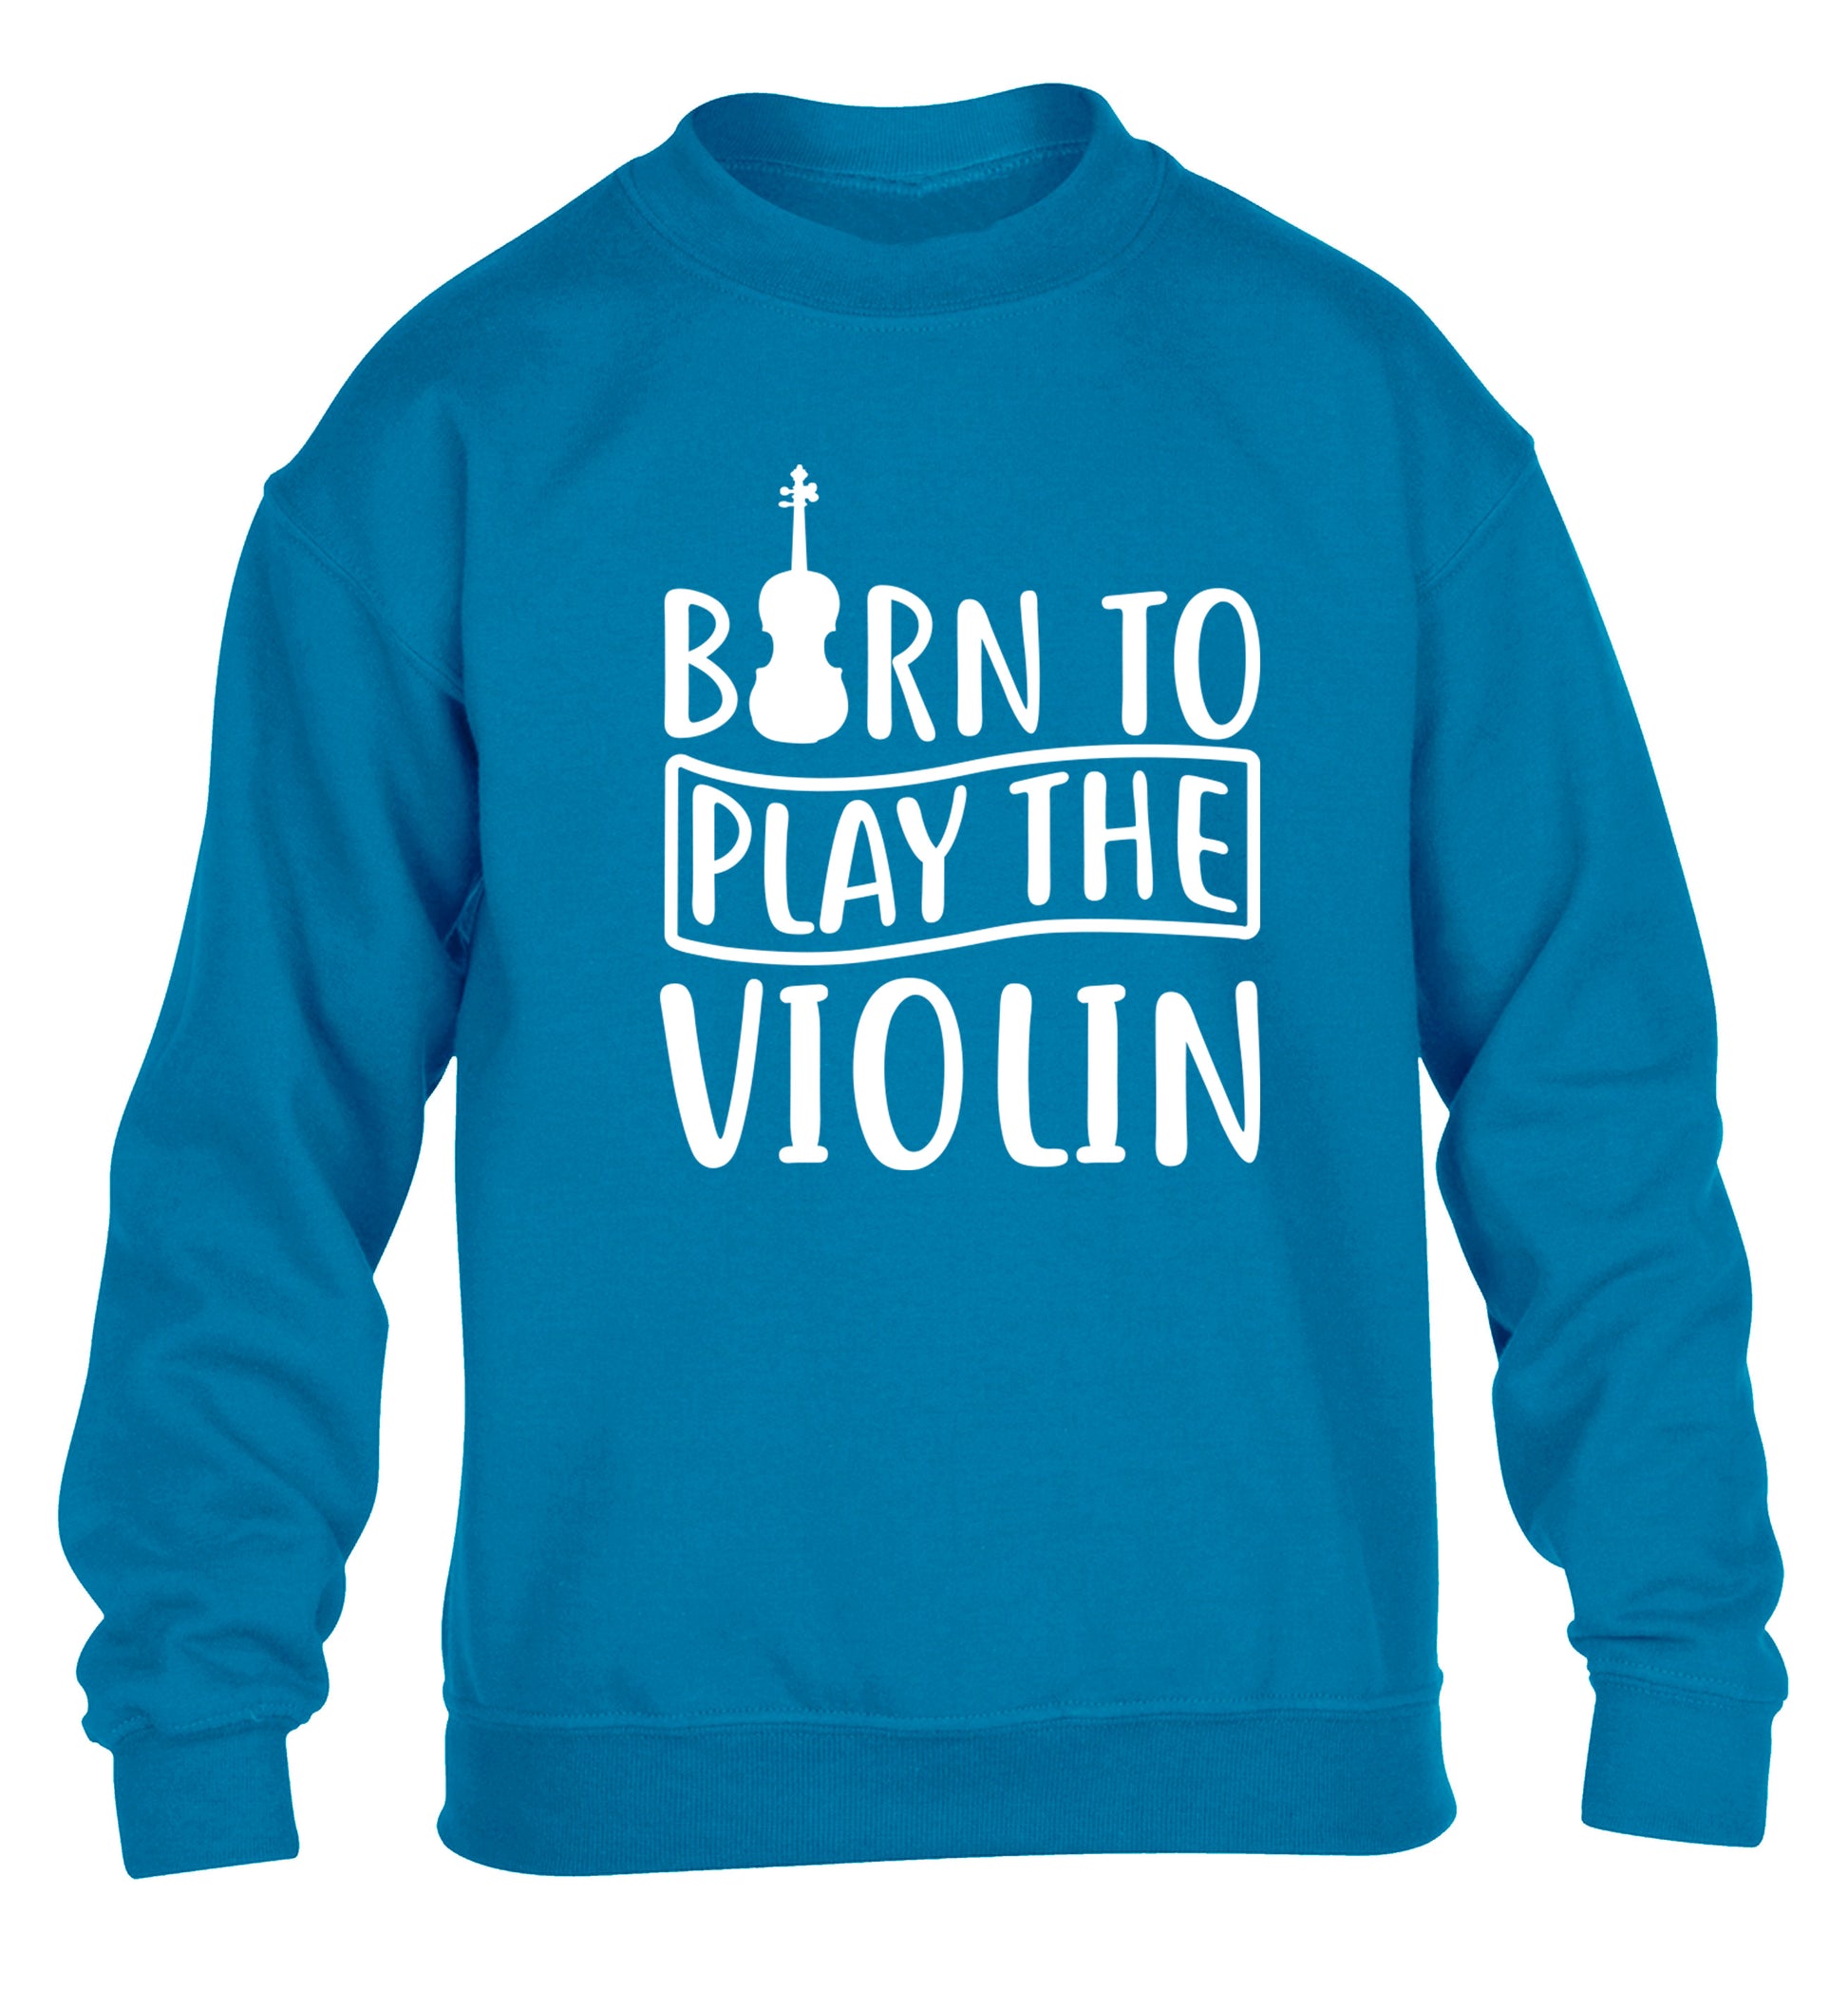 Born to Play the Violin children's blue sweater 12-13 Years